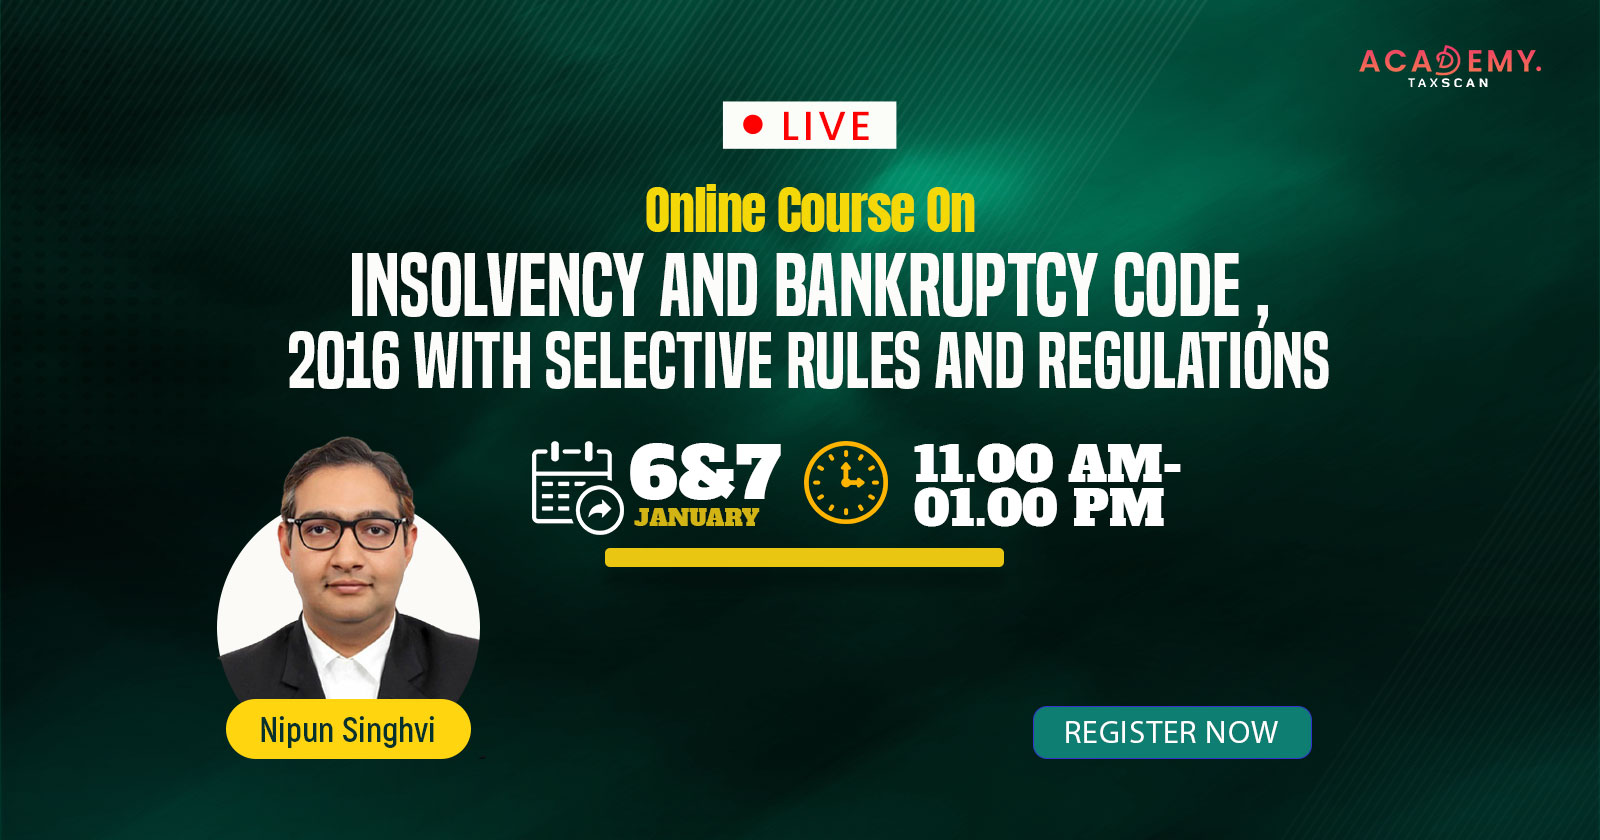 Live Online Course - Insolvency and Bankruptcy Code 2016 - Insolvency and Bankruptcy Code - Bankruptcy Code 2016 - IBBI - Case laws - Supreme Court - NCLAT - NCLT - Taxscan Academy